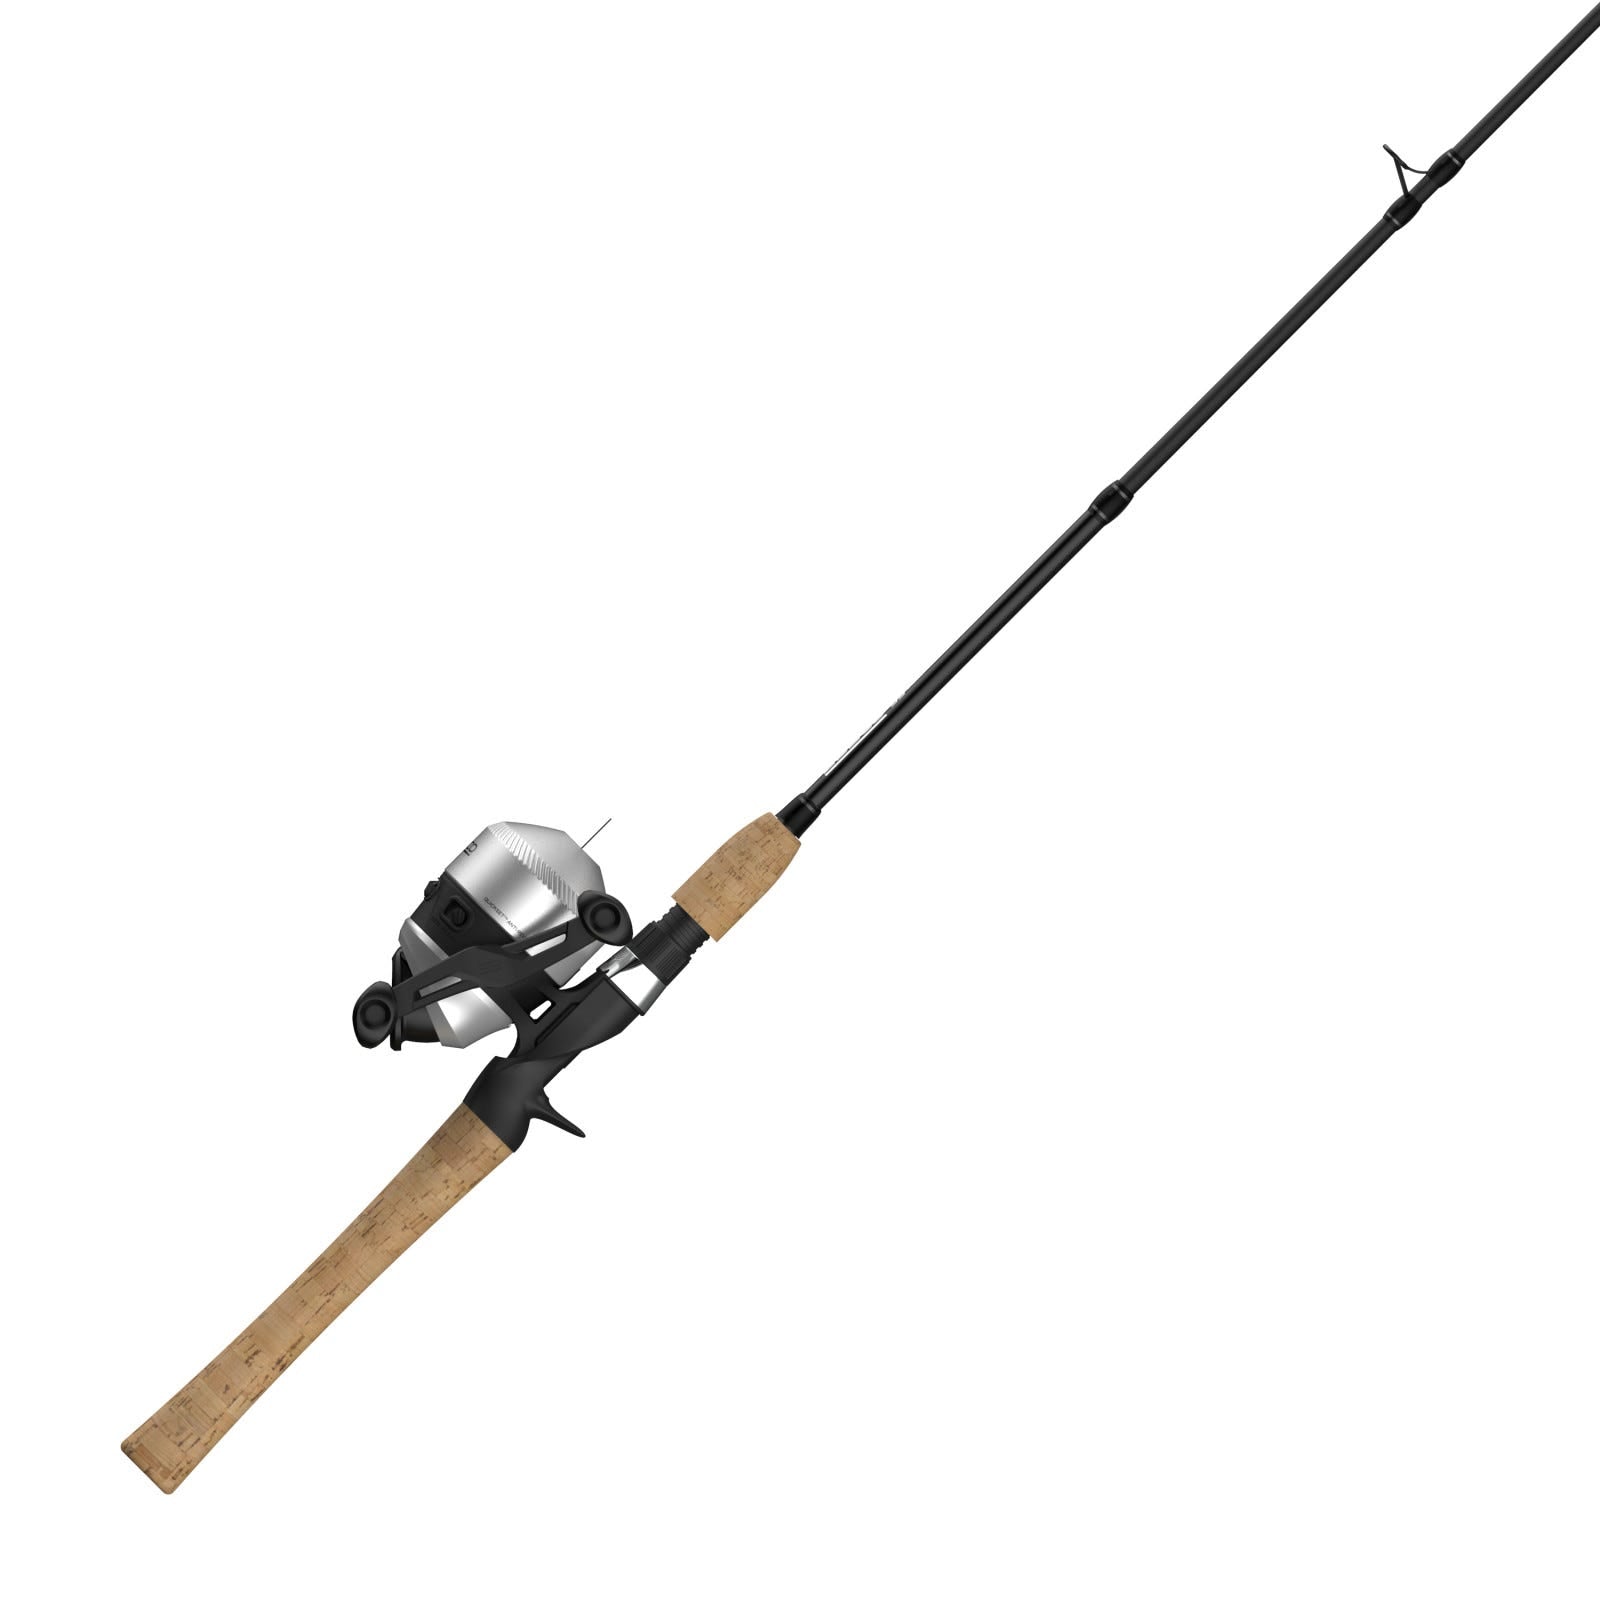  Zebco 33 Micro Spincast Reel and Fishing Rod Combo, 4